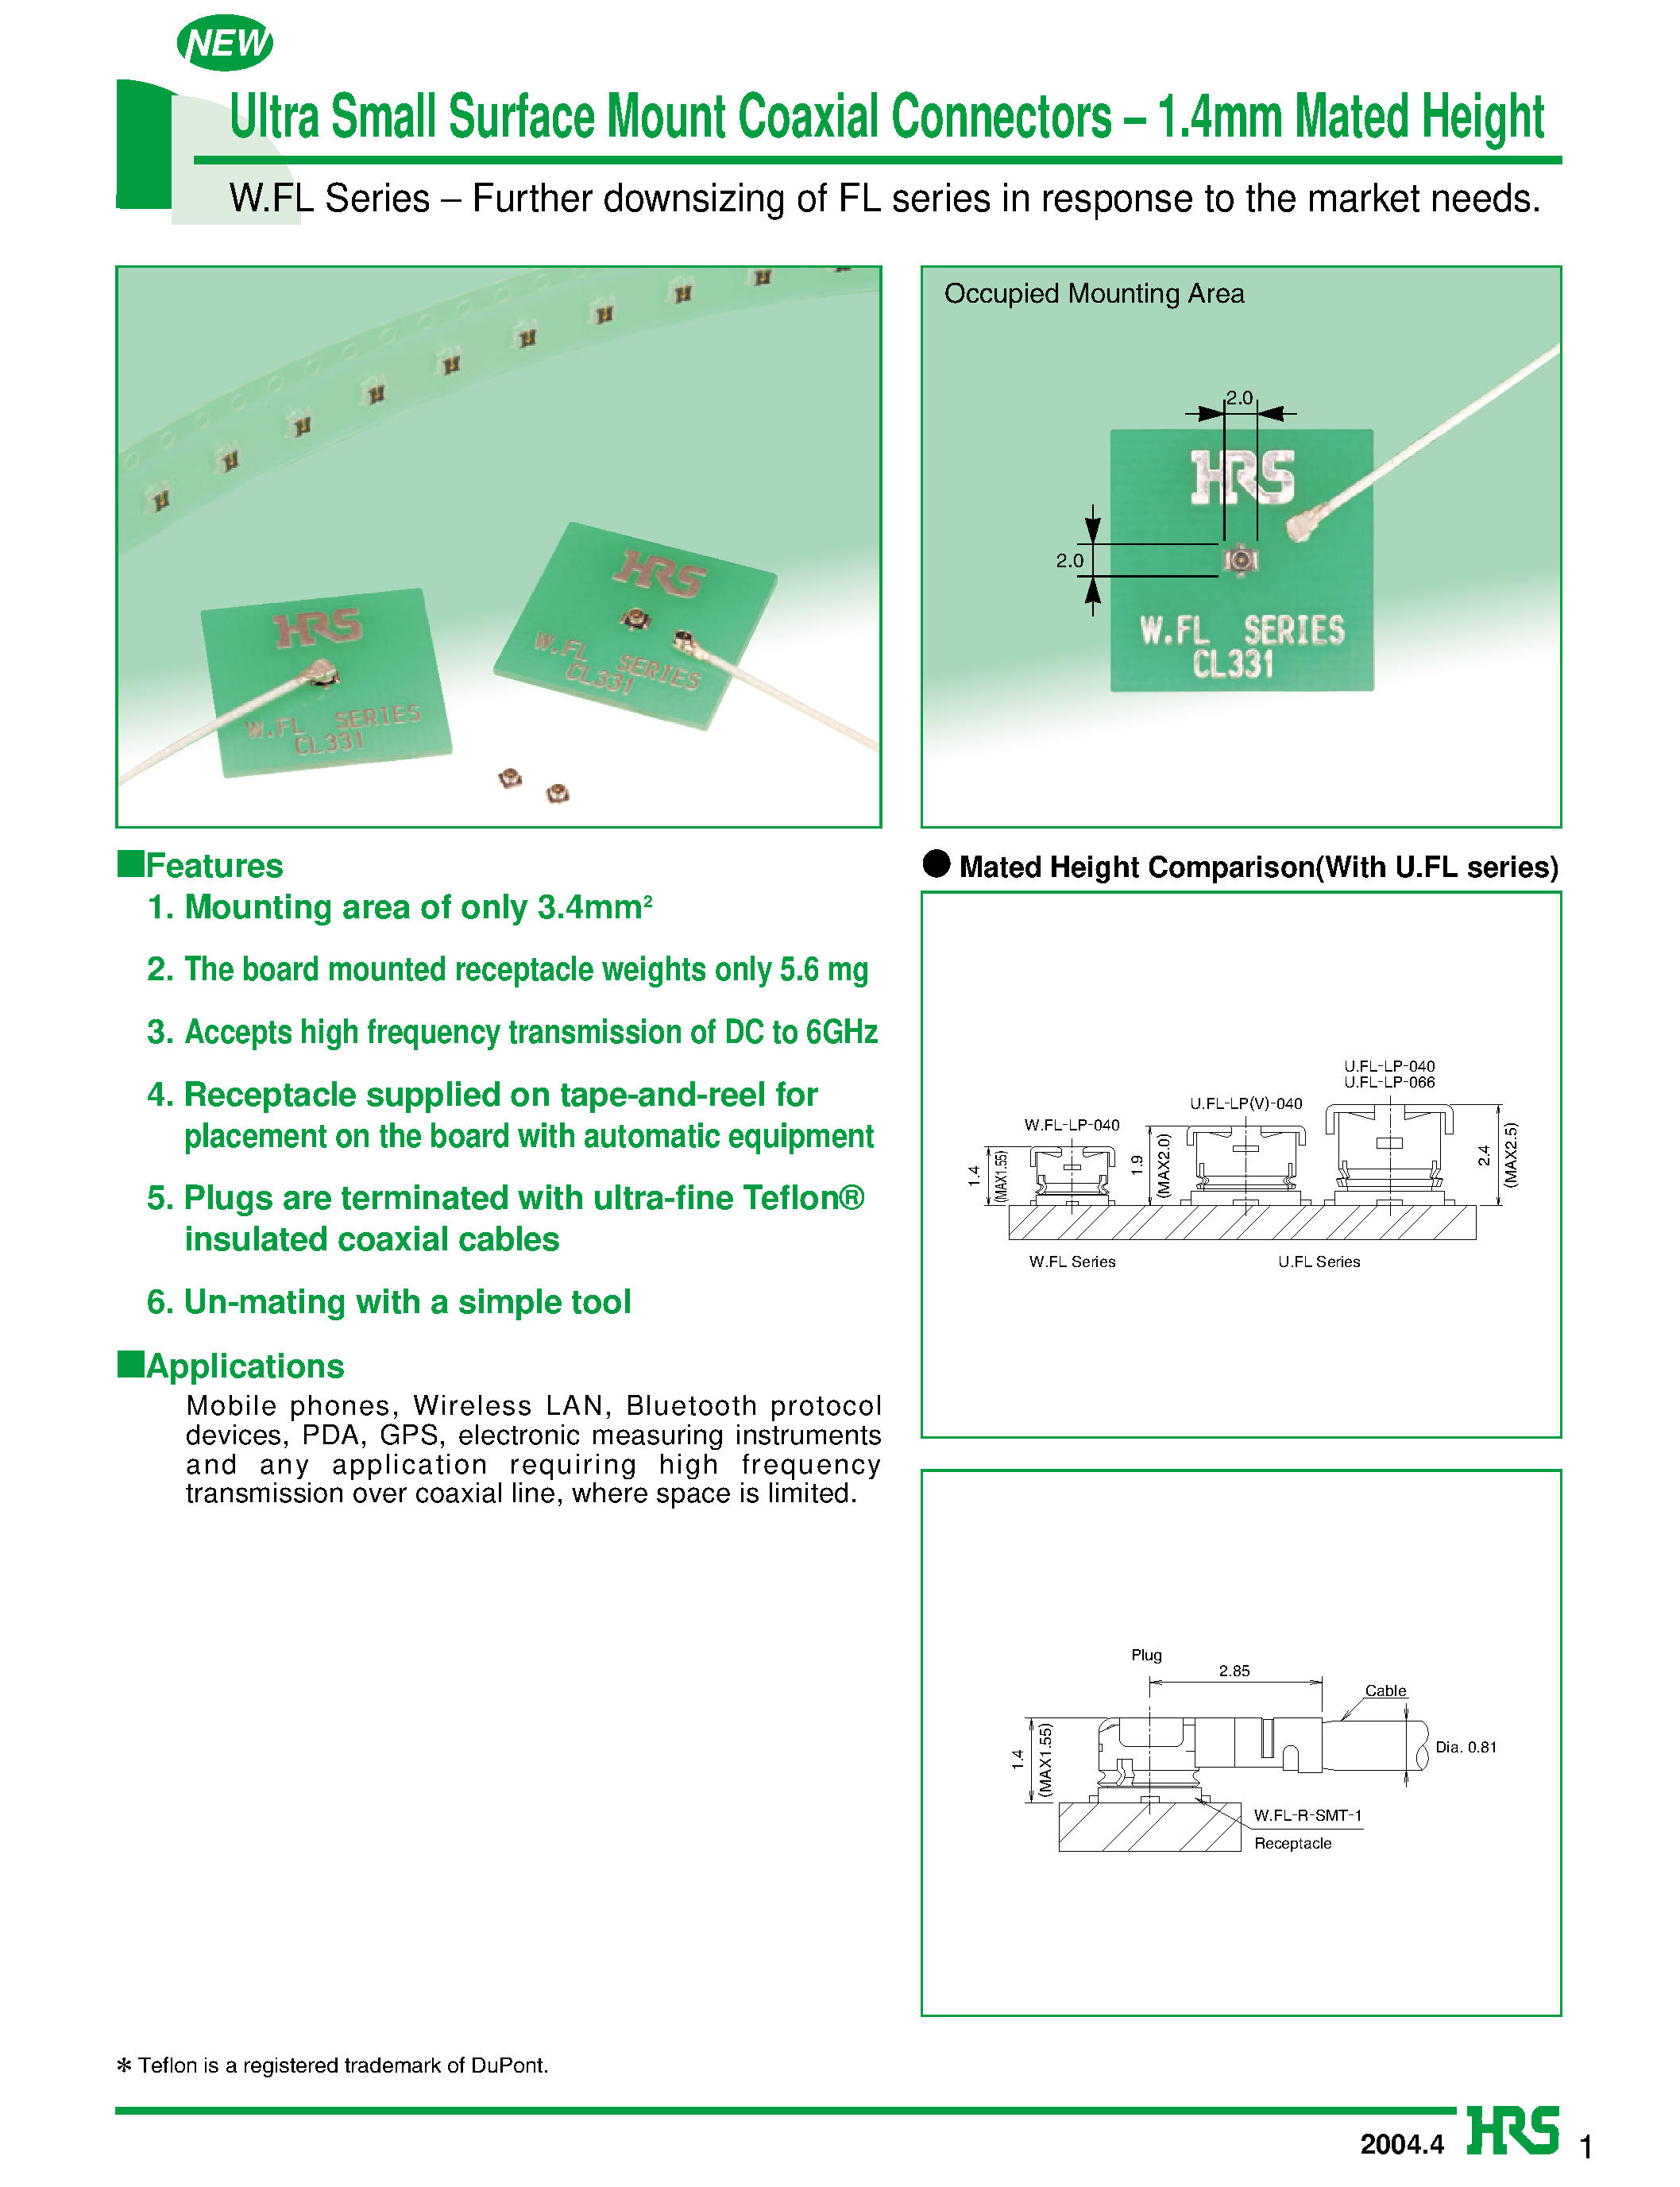 Datasheet HRMP-W.FLJ - Ultra Small Surface Mount Coaxial Connectors - 1.4mm Mated Height page 1